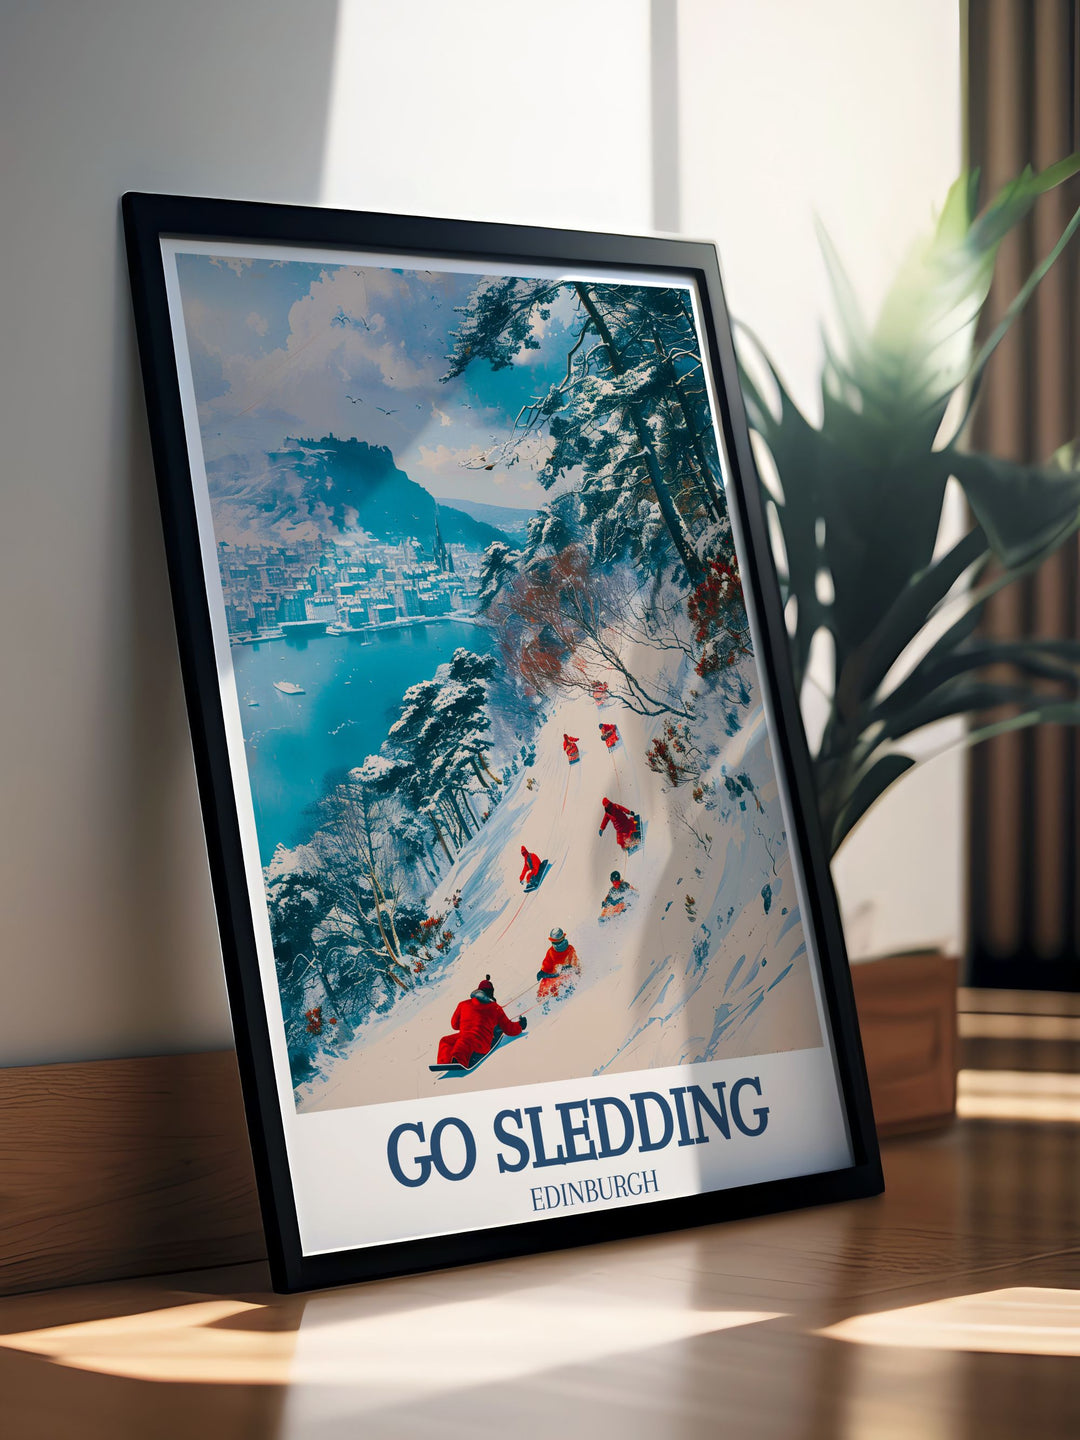 Modern wall decor featuring a dynamic sledding scene at Arthurs Seat, with vibrant colors and intricate details bringing the winter fun to life.